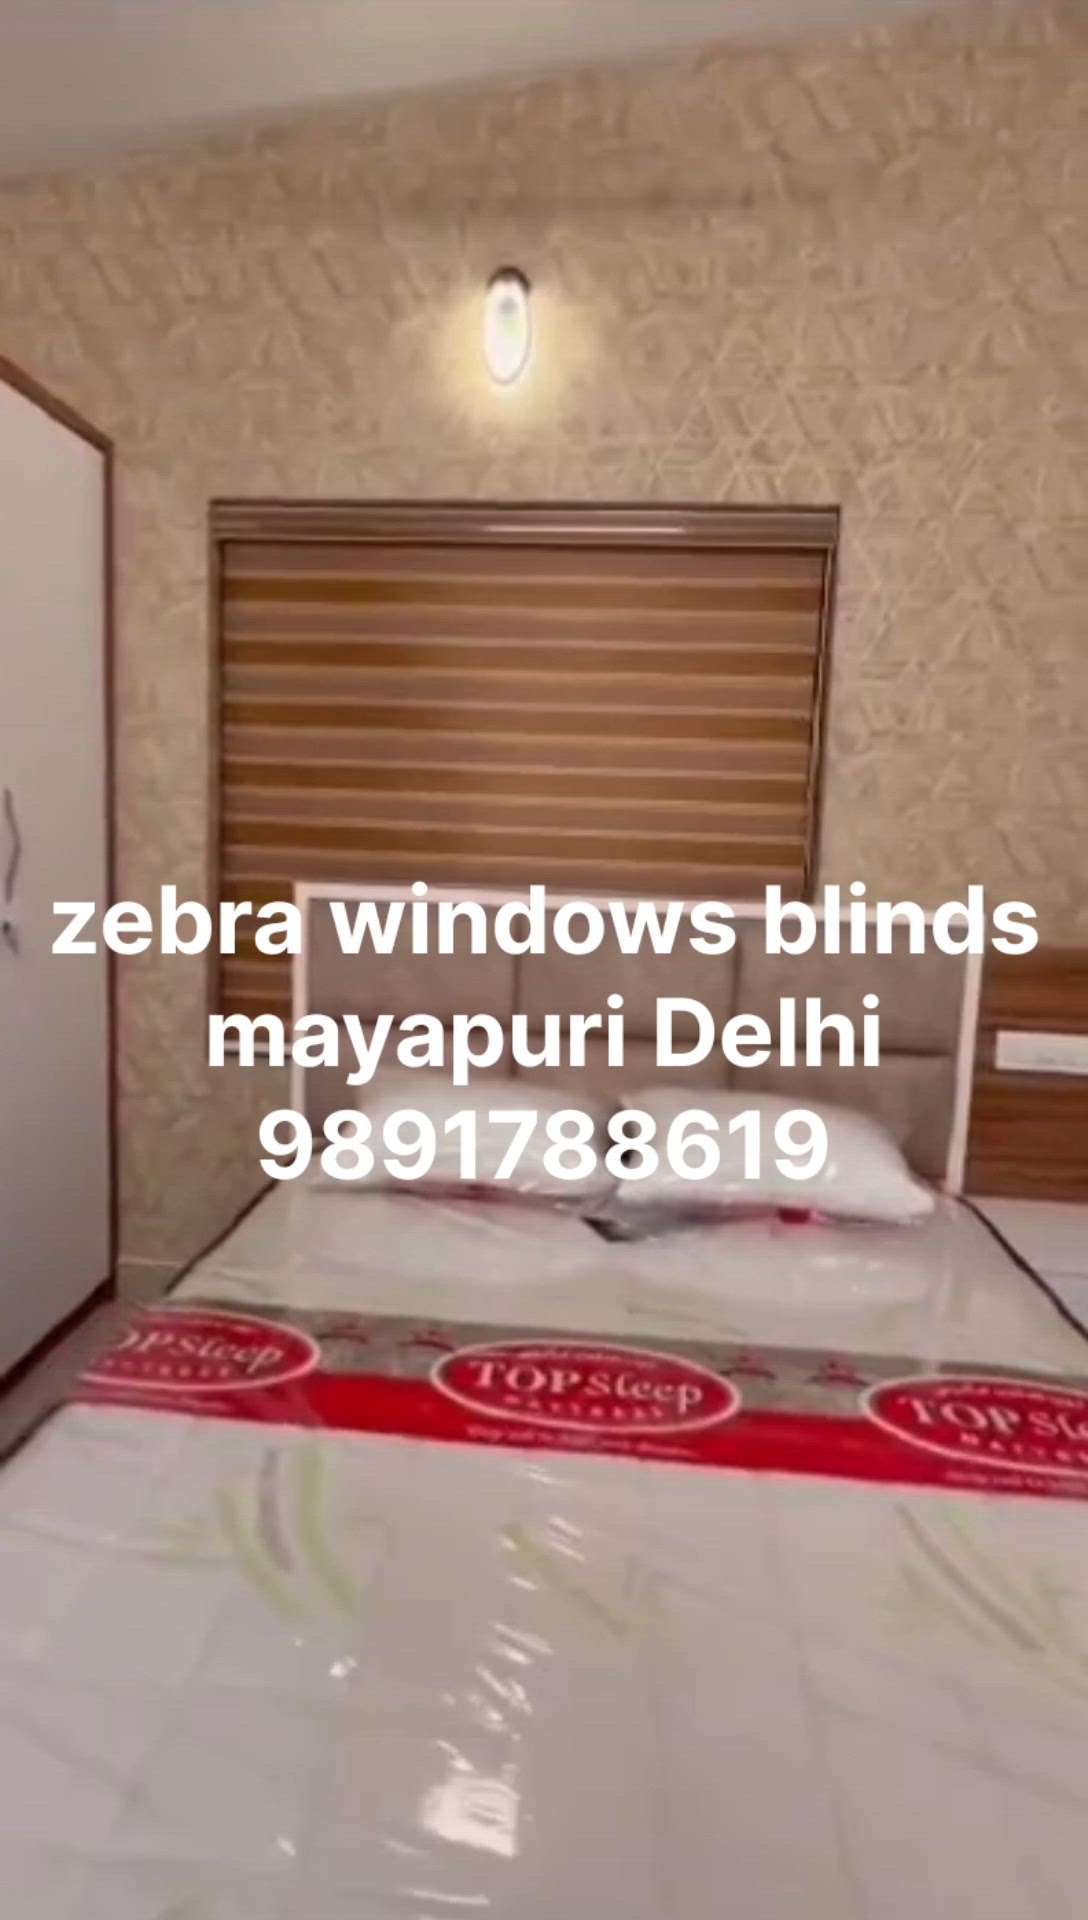 Our Complete Review of zebra windows blinds curtain mayapuri Delhi mobile no 9891788619